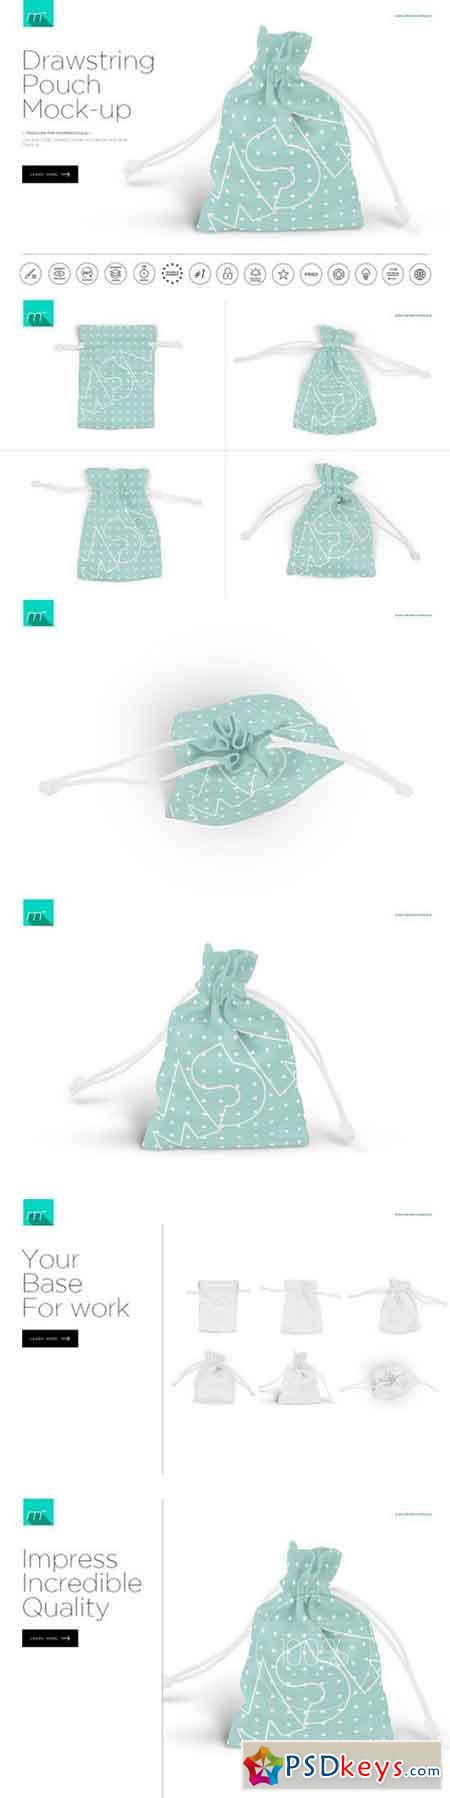 Drawstring Pouch Mock-up 600108